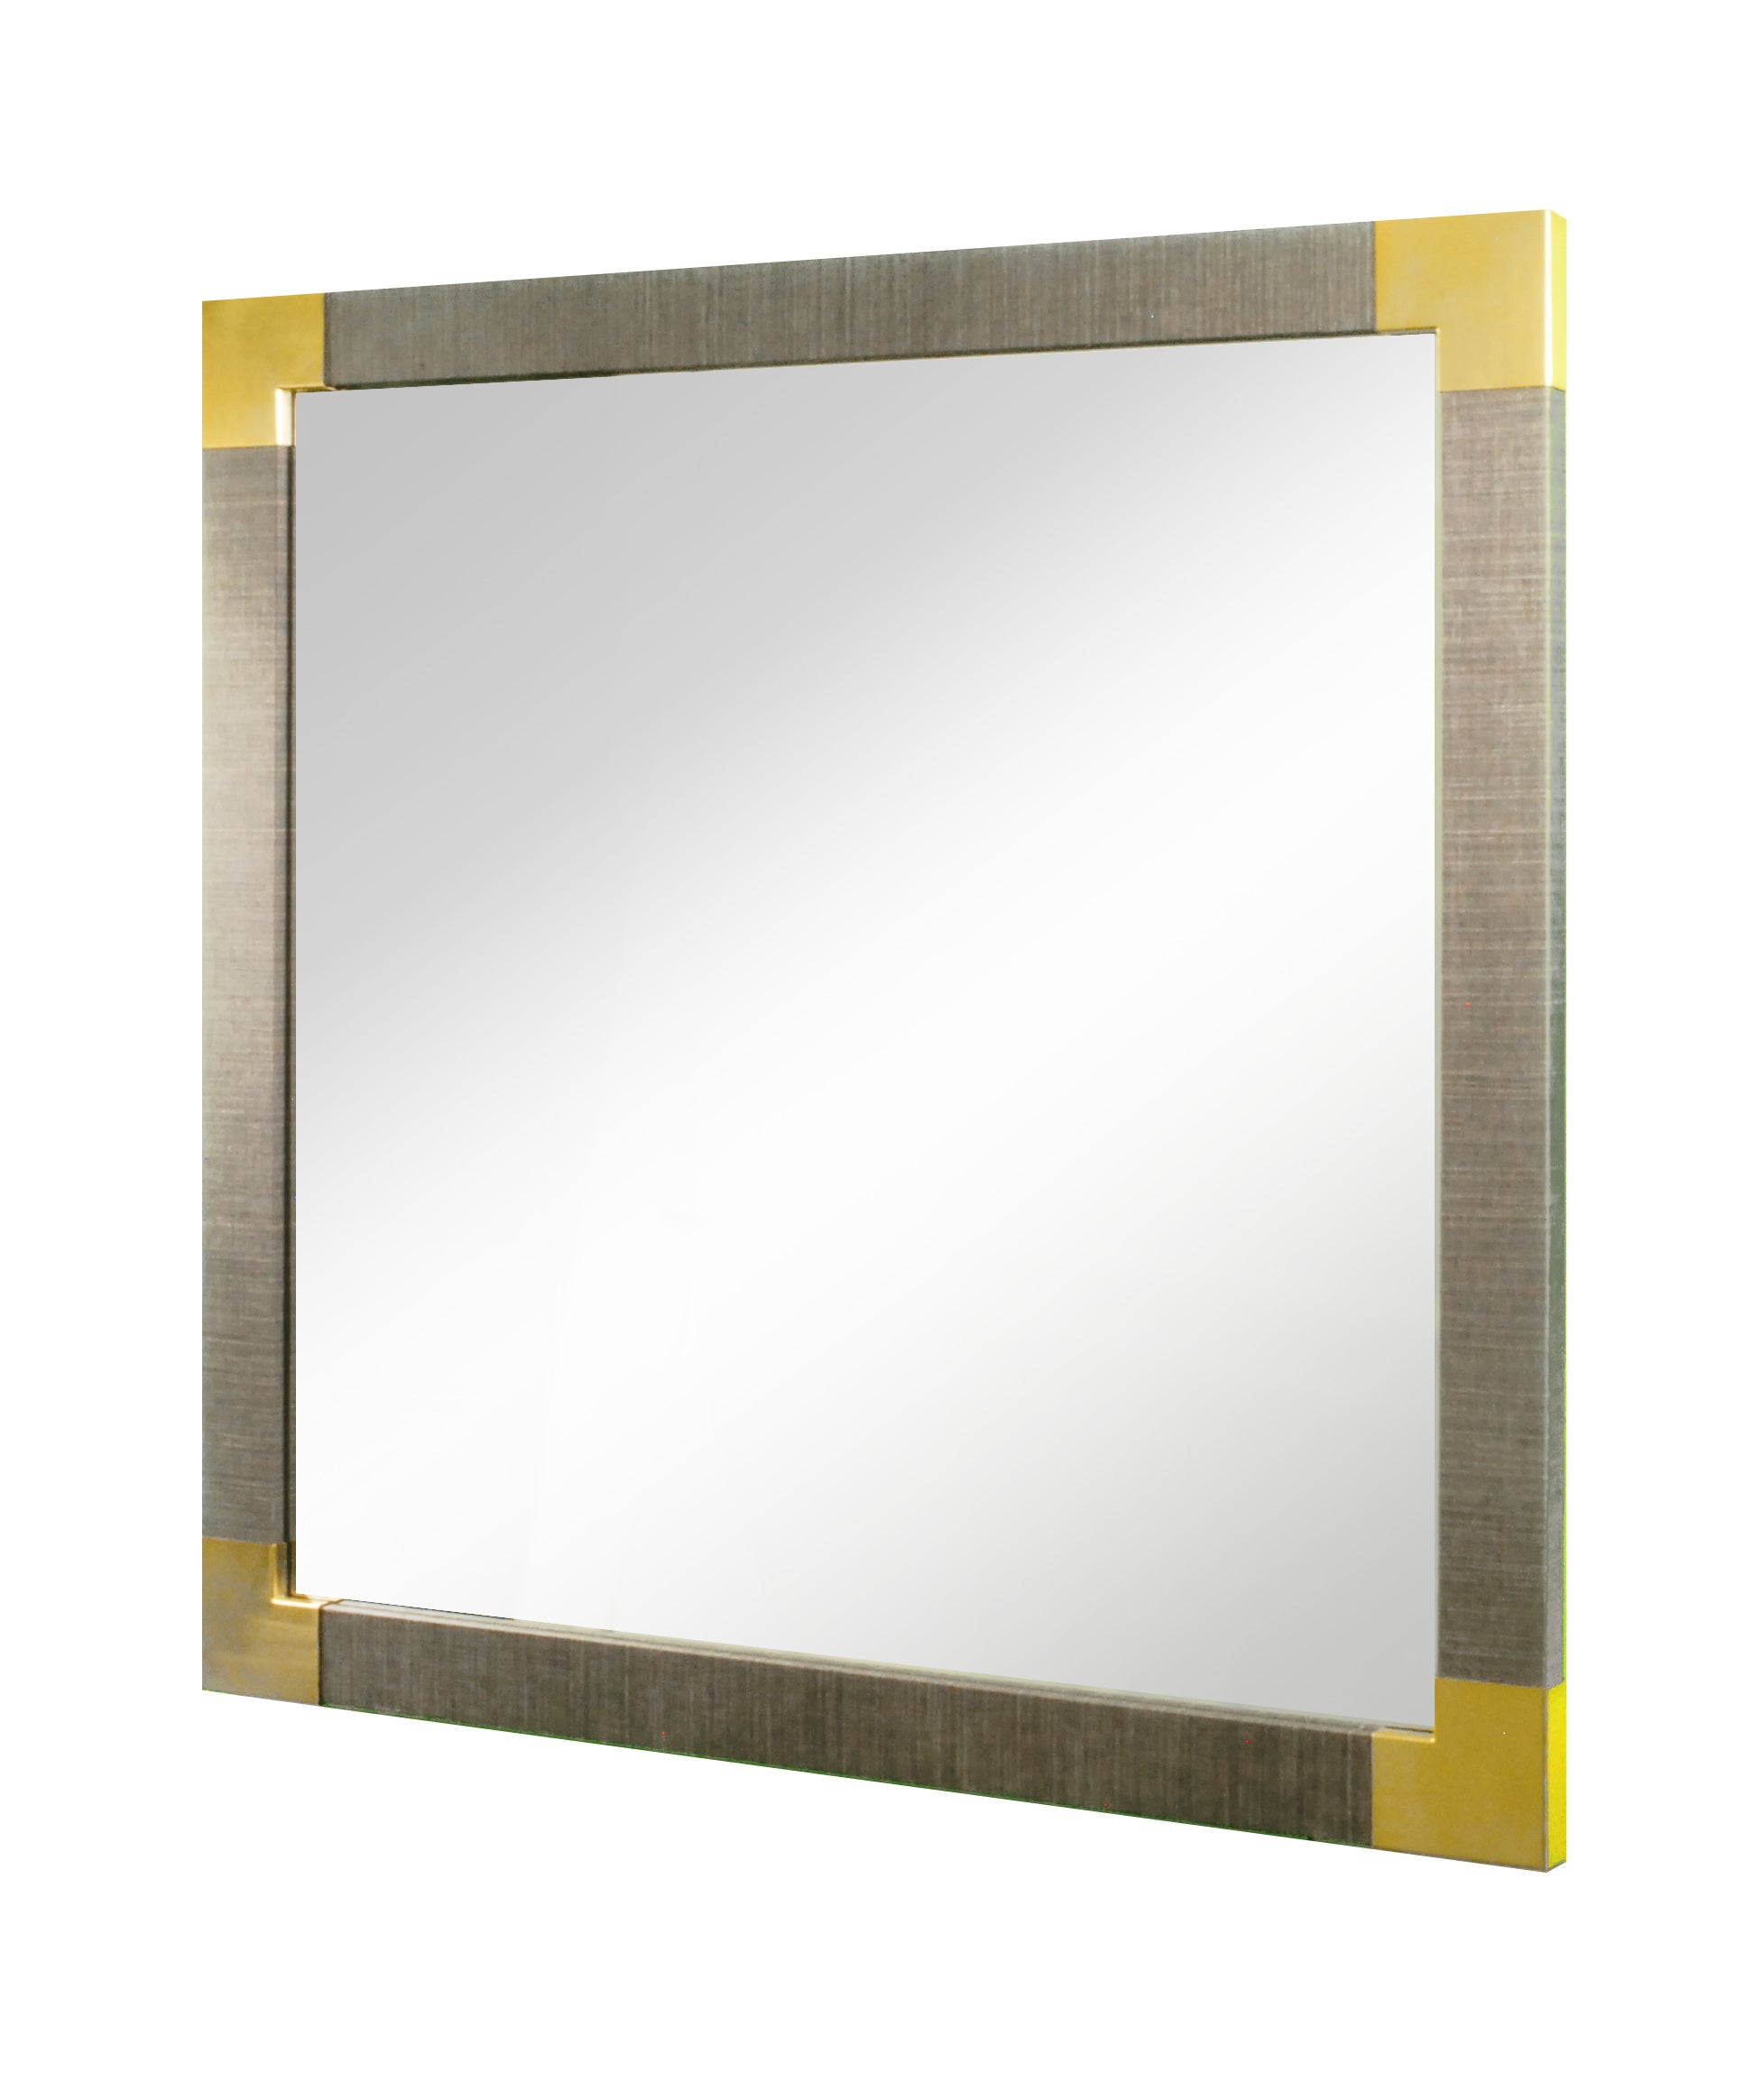 Square mirror with brass corners